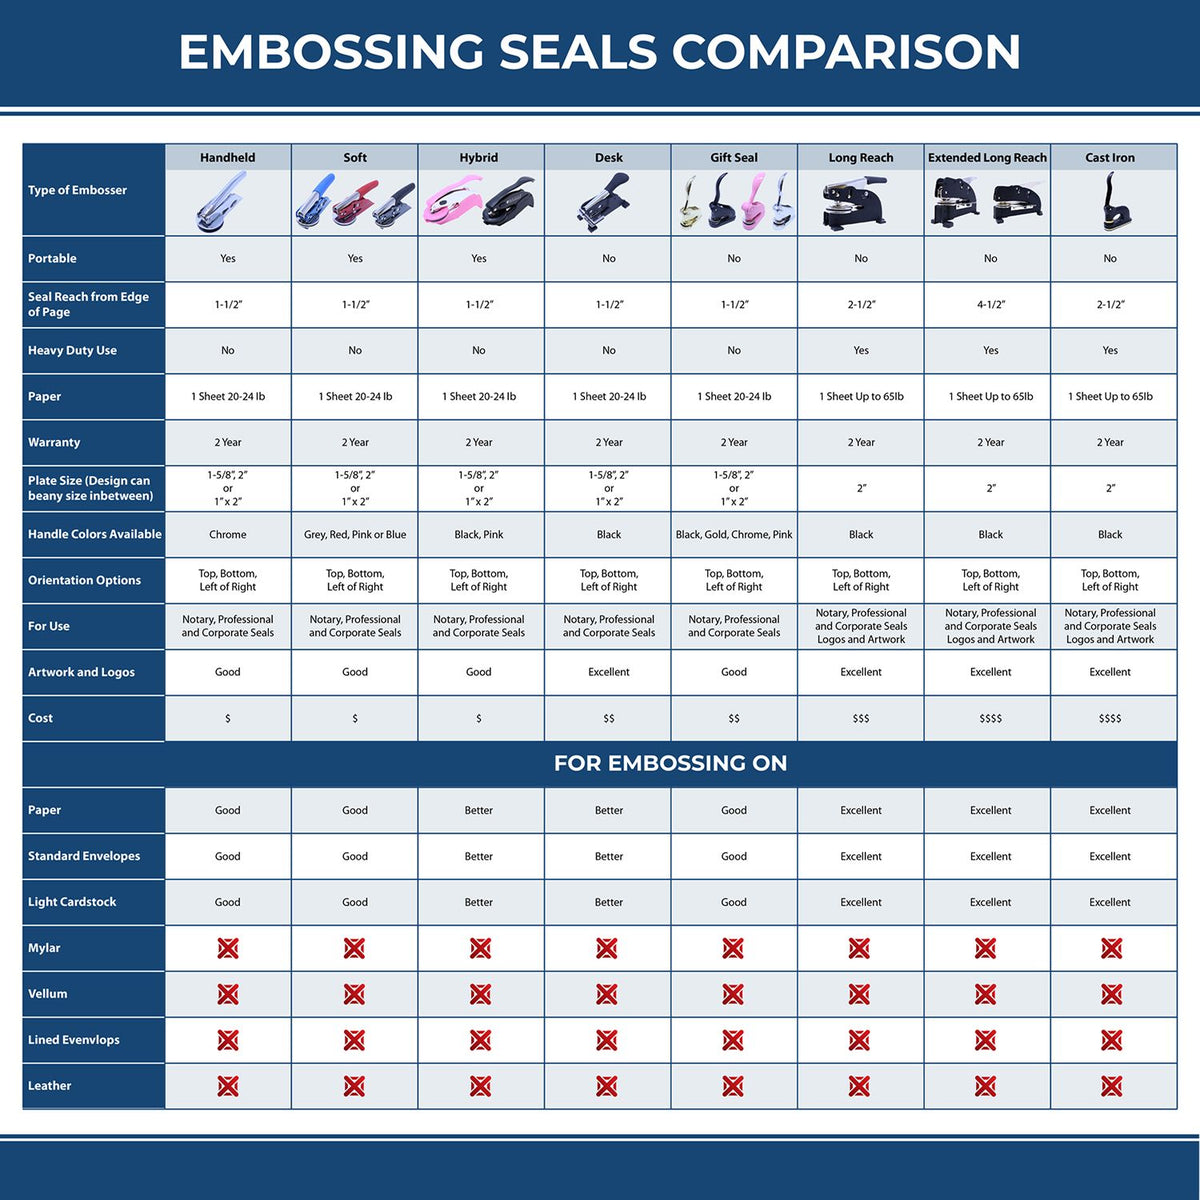 A comparison chart for the different types of mount models available for the Extended Long Reach South Dakota Architect Seal Embosser.